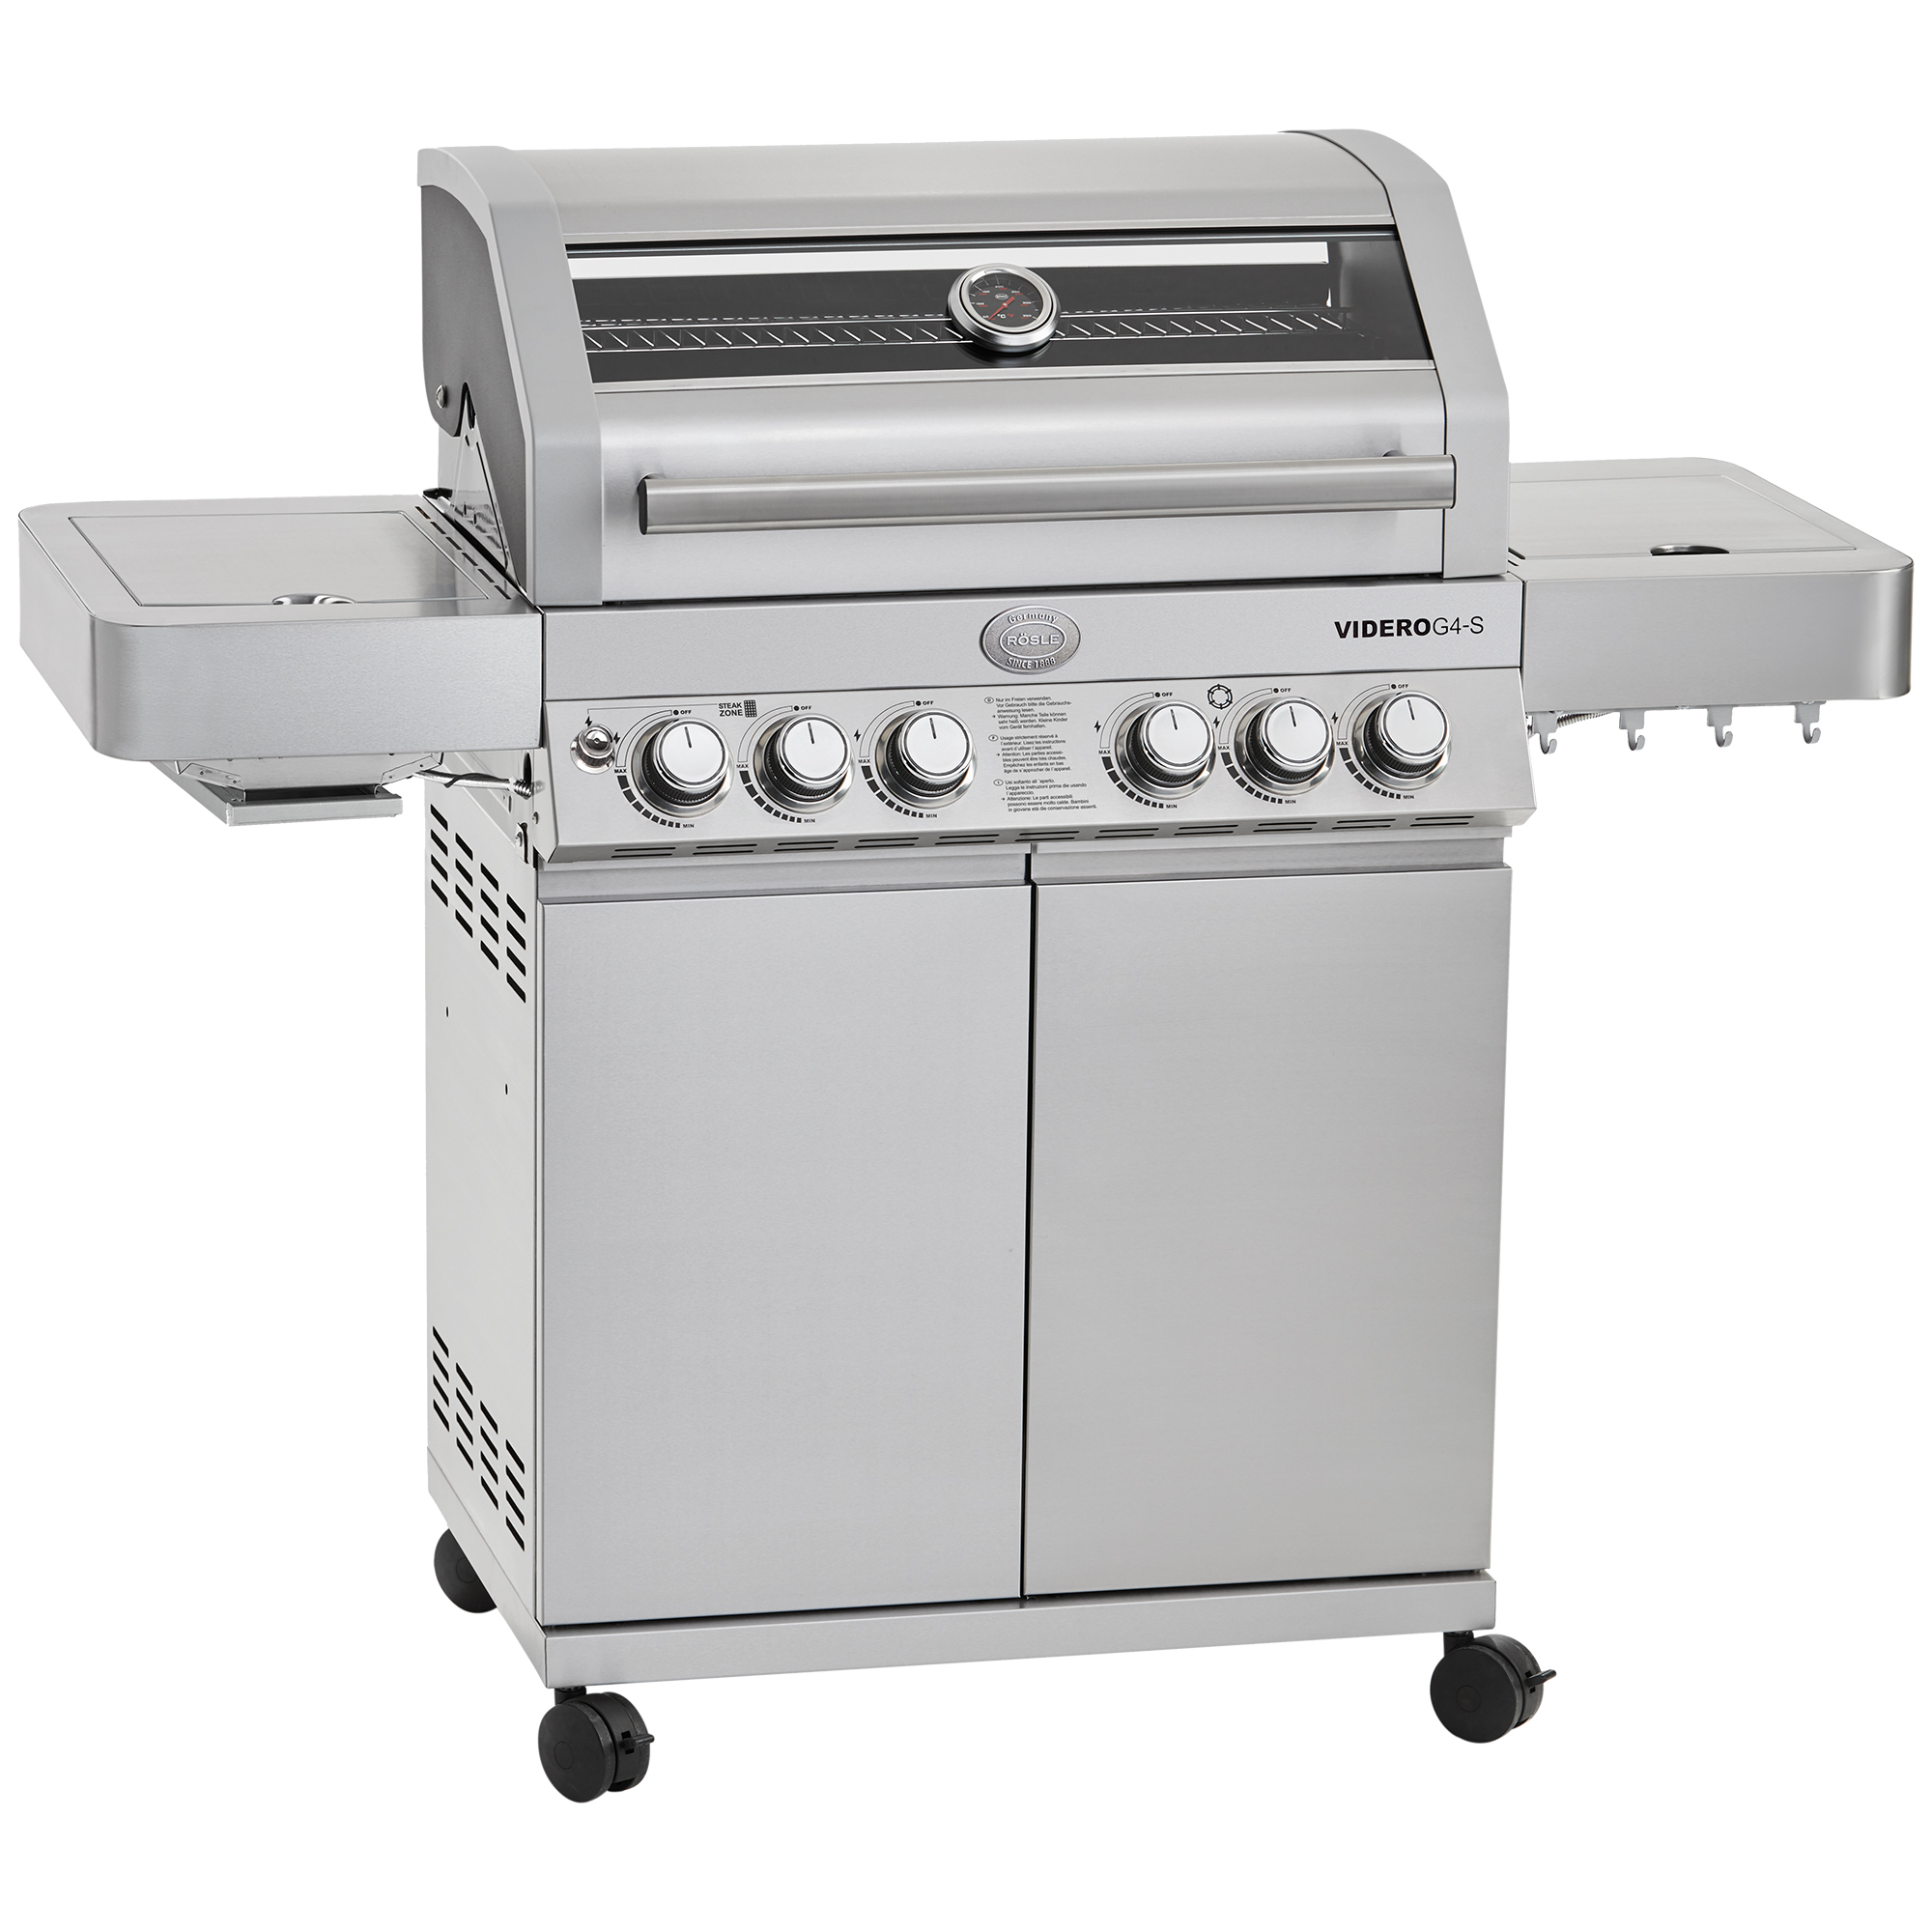 Gas Grill BBQ-Station Videro G4-S Stainless Steel 50mbar (Model year until 2020)